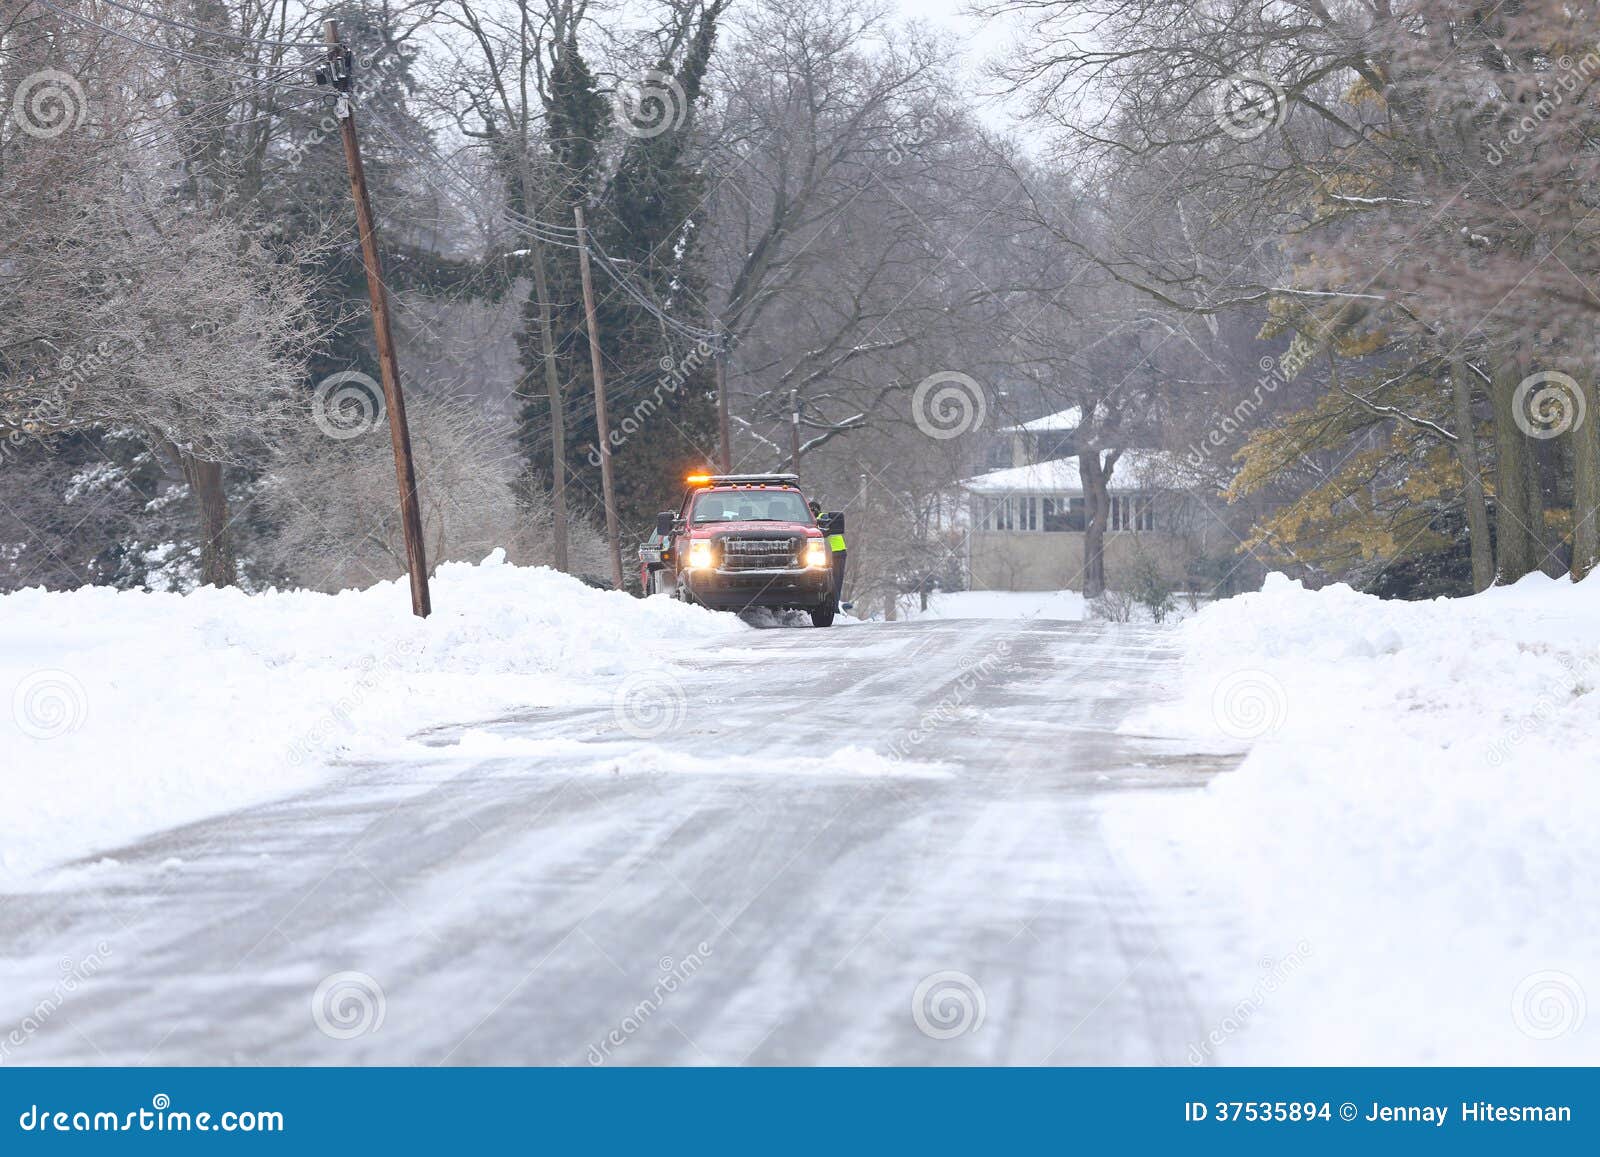 Emergency Vehicle in the Snow Stock Photo - Image of truck, shoveling ...